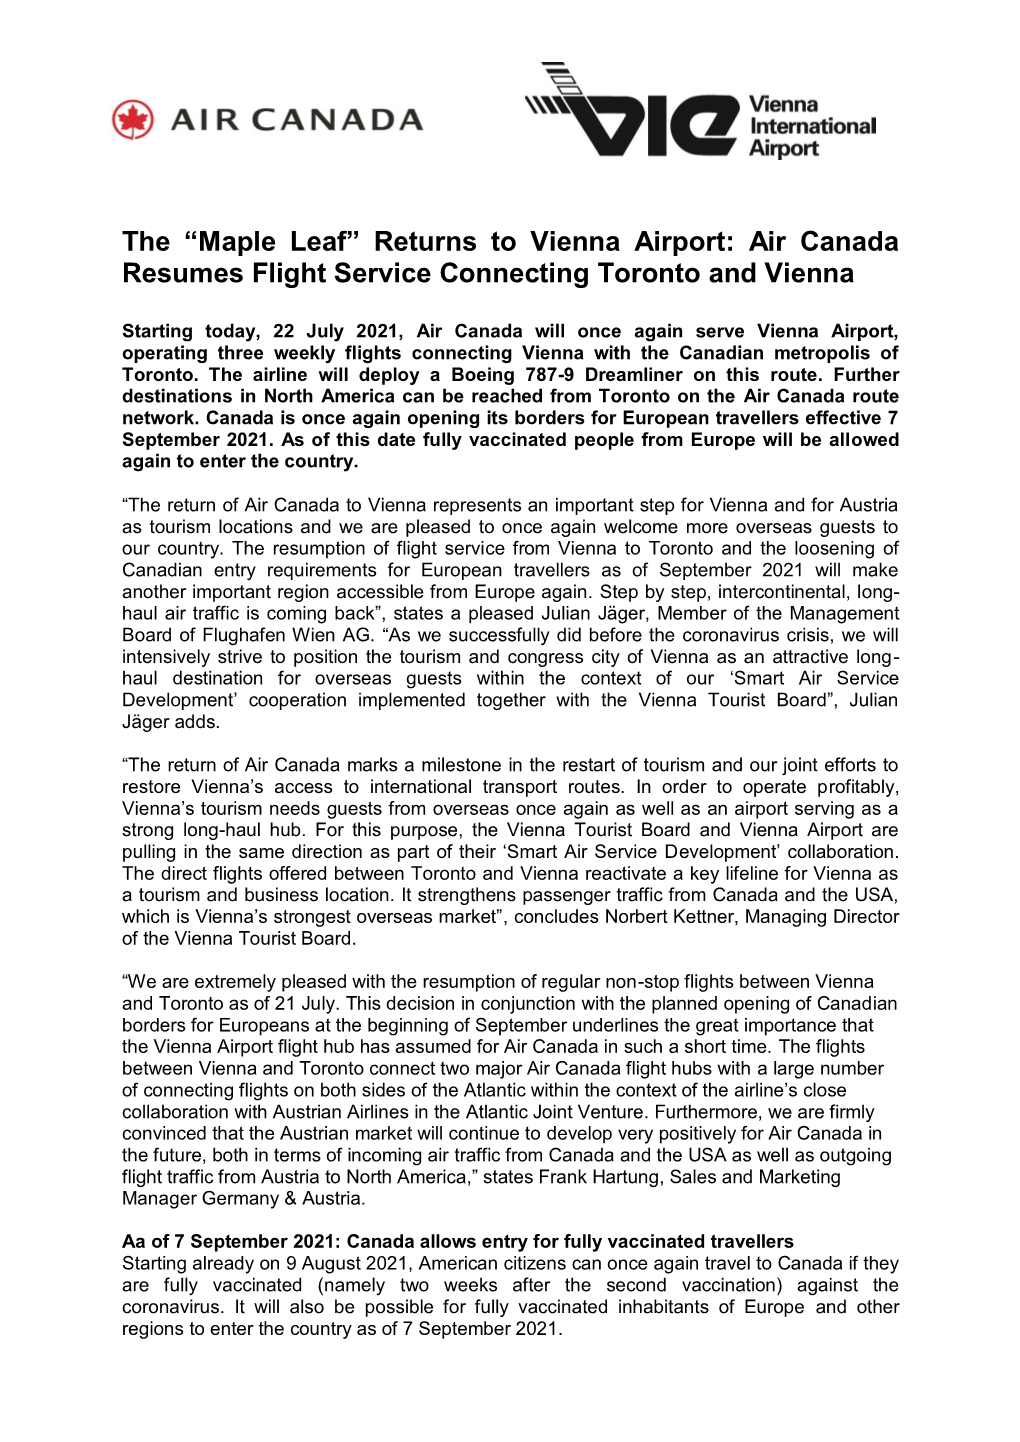 The “Maple Leaf” Returns to Vienna Airport: Air Canada Resumes Flight Service Connecting Toronto and Vienna